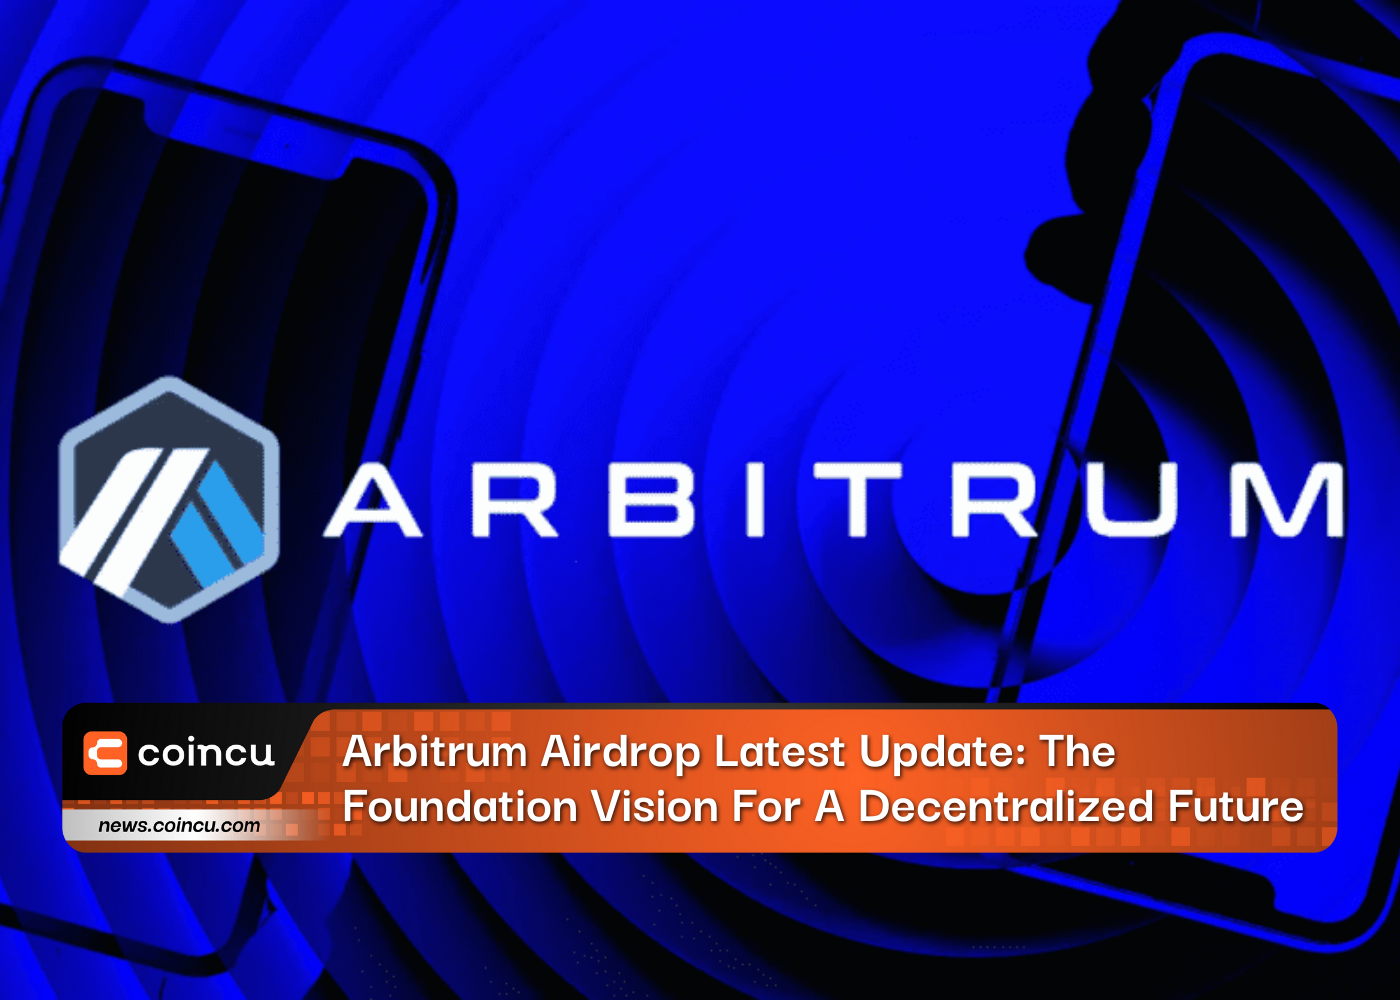 Arbitrum Airdrop Latest Update: The Foundation Vision For A Decentralized Future